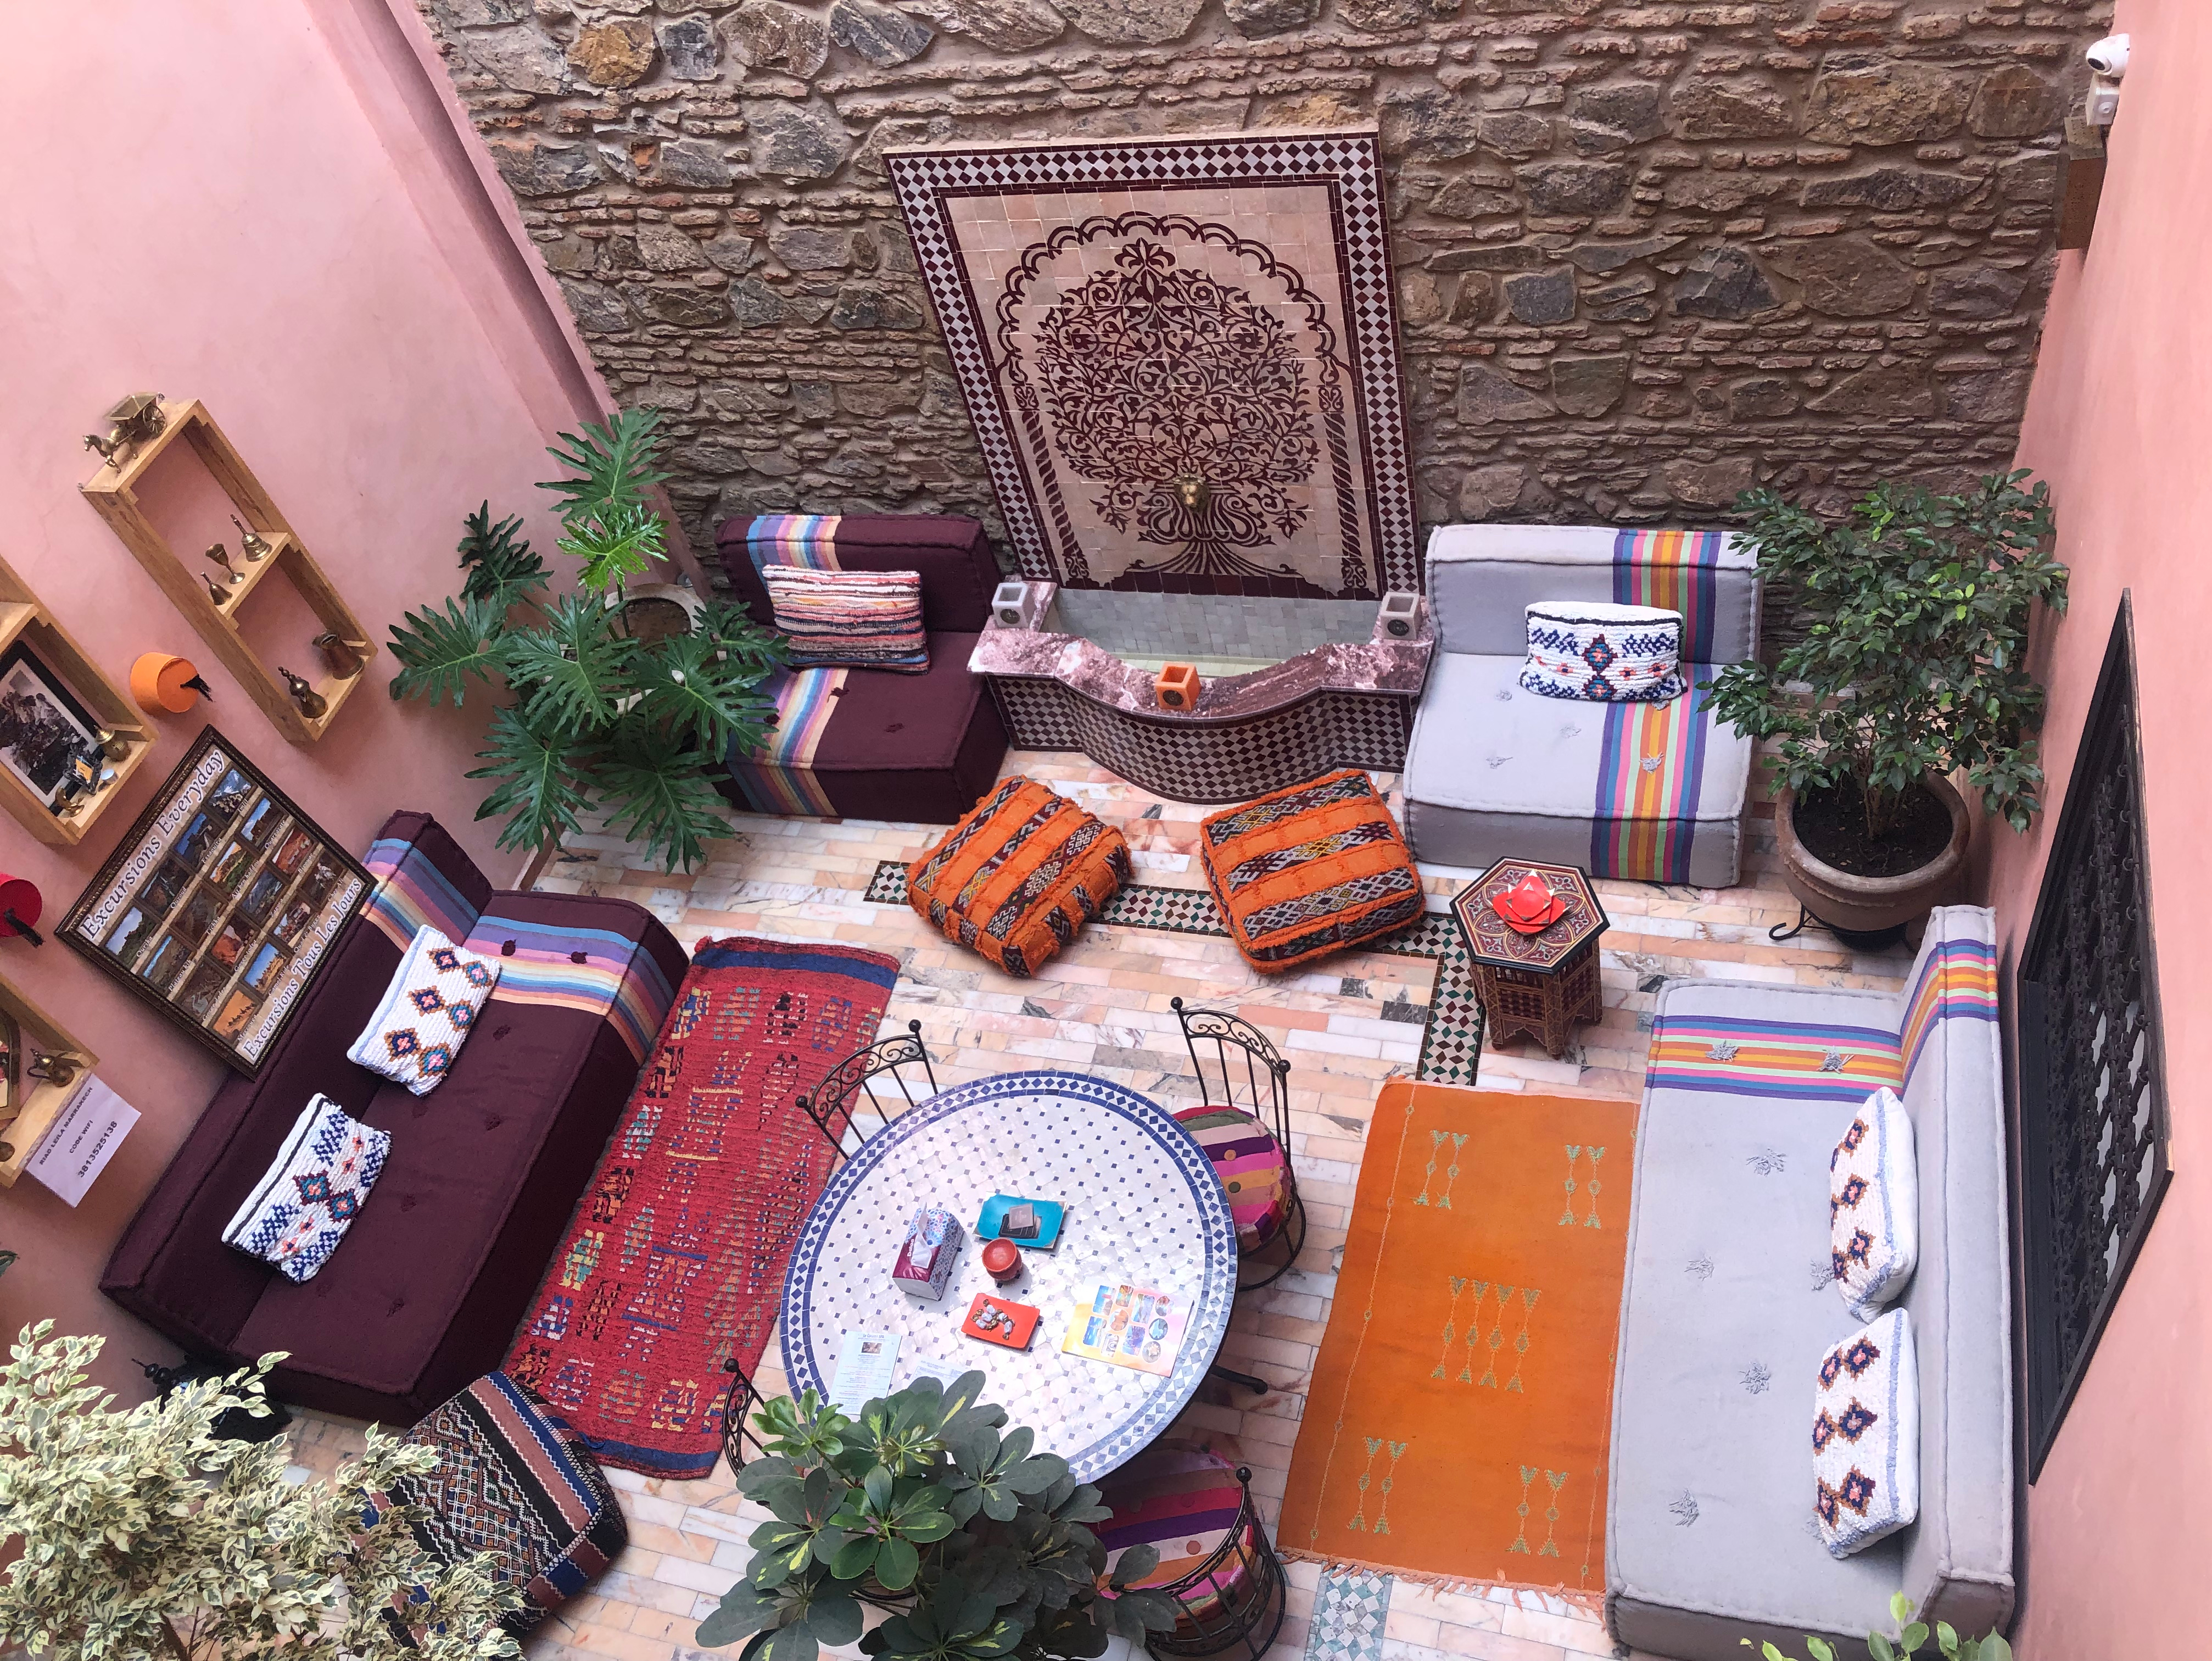 Our Riad stay at Marrakech!